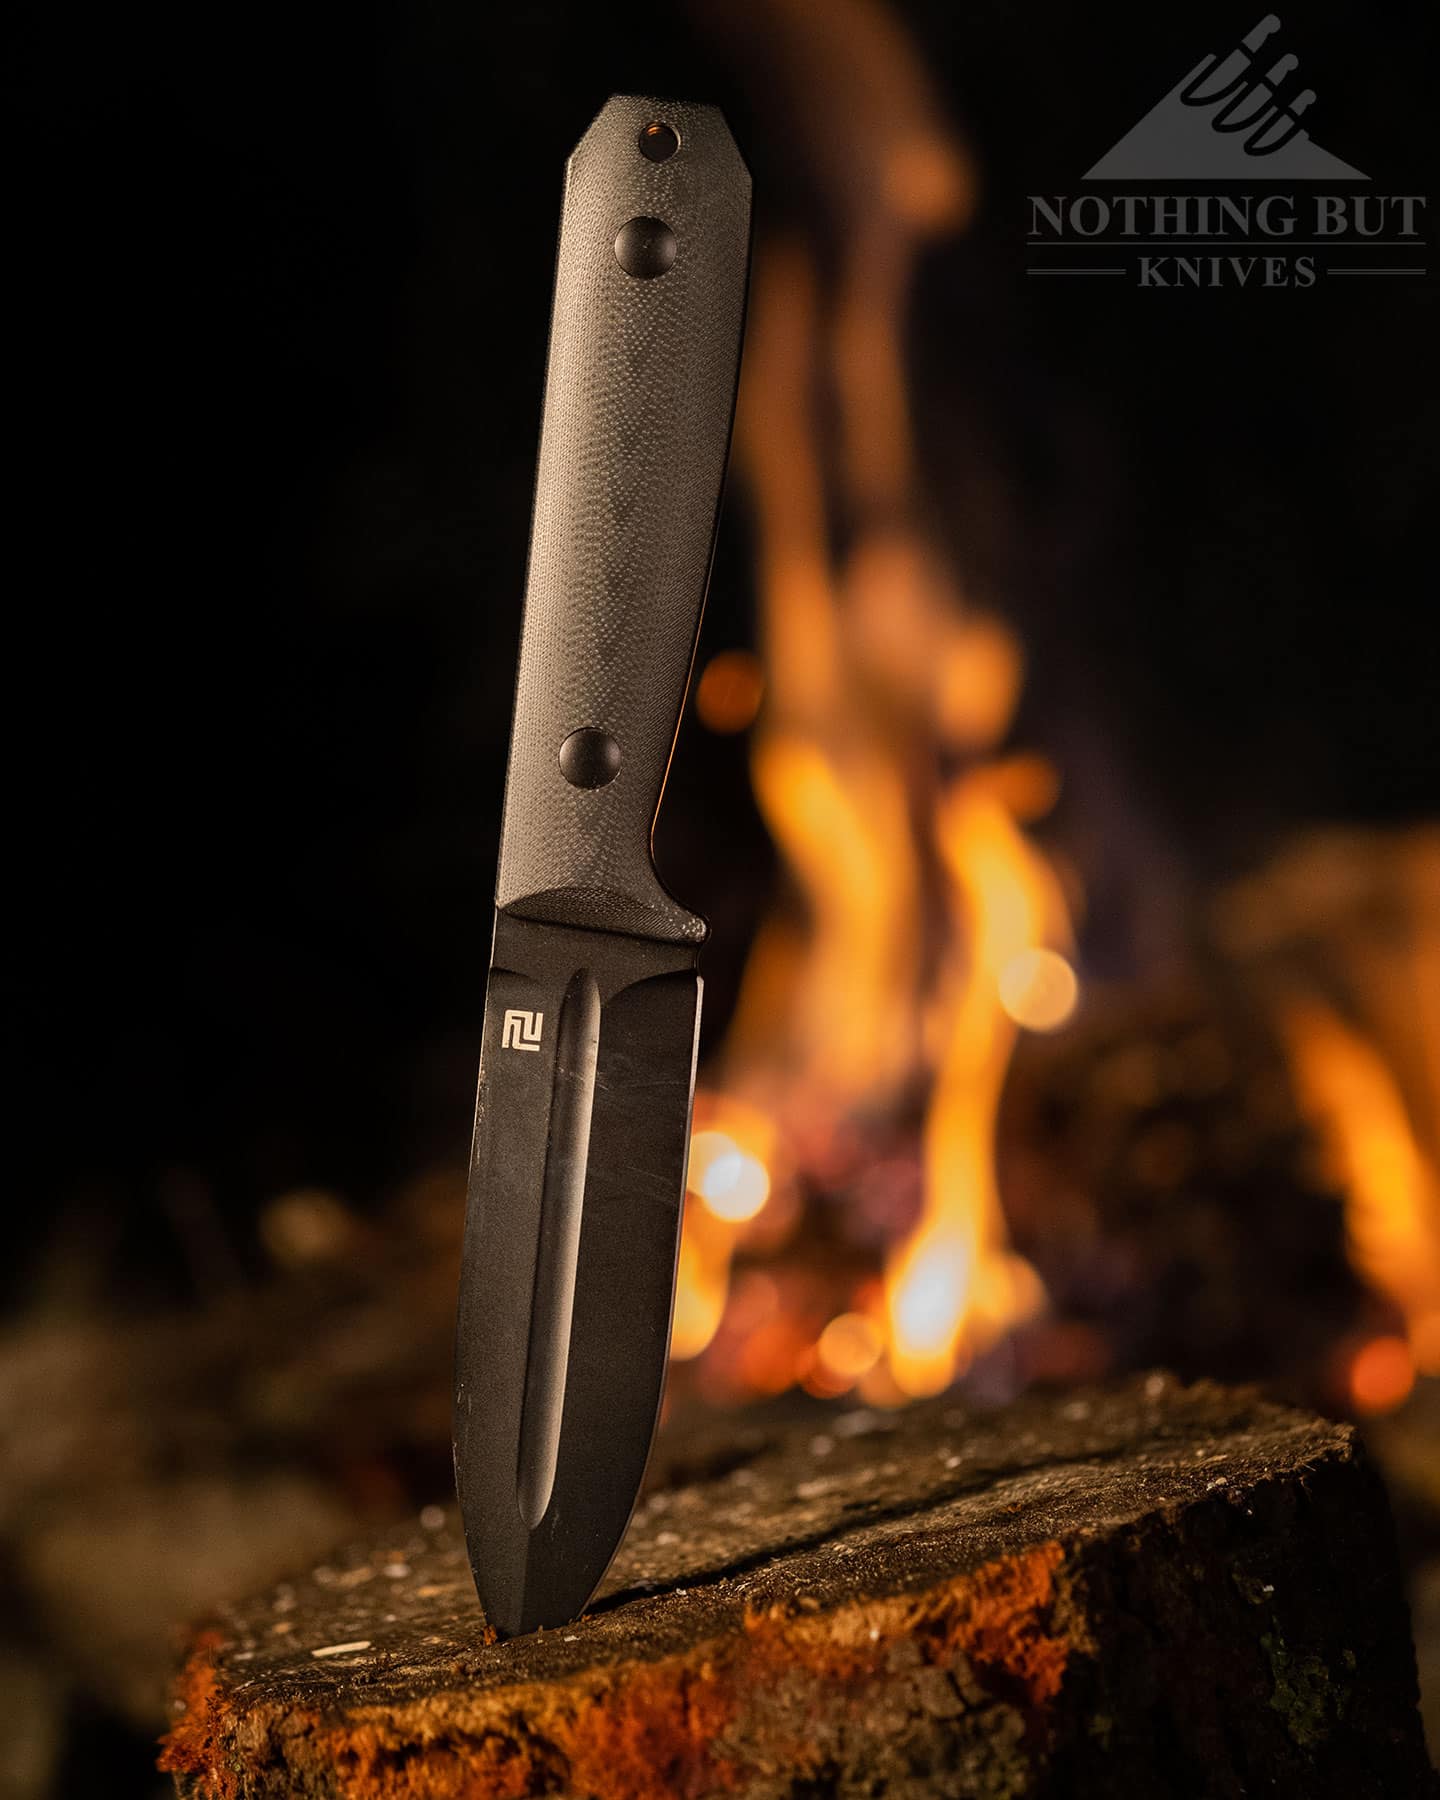 The Artisan Wreckhart was designed by Joe Flowers to be a wilderness capable survival knife with tactical applications. 